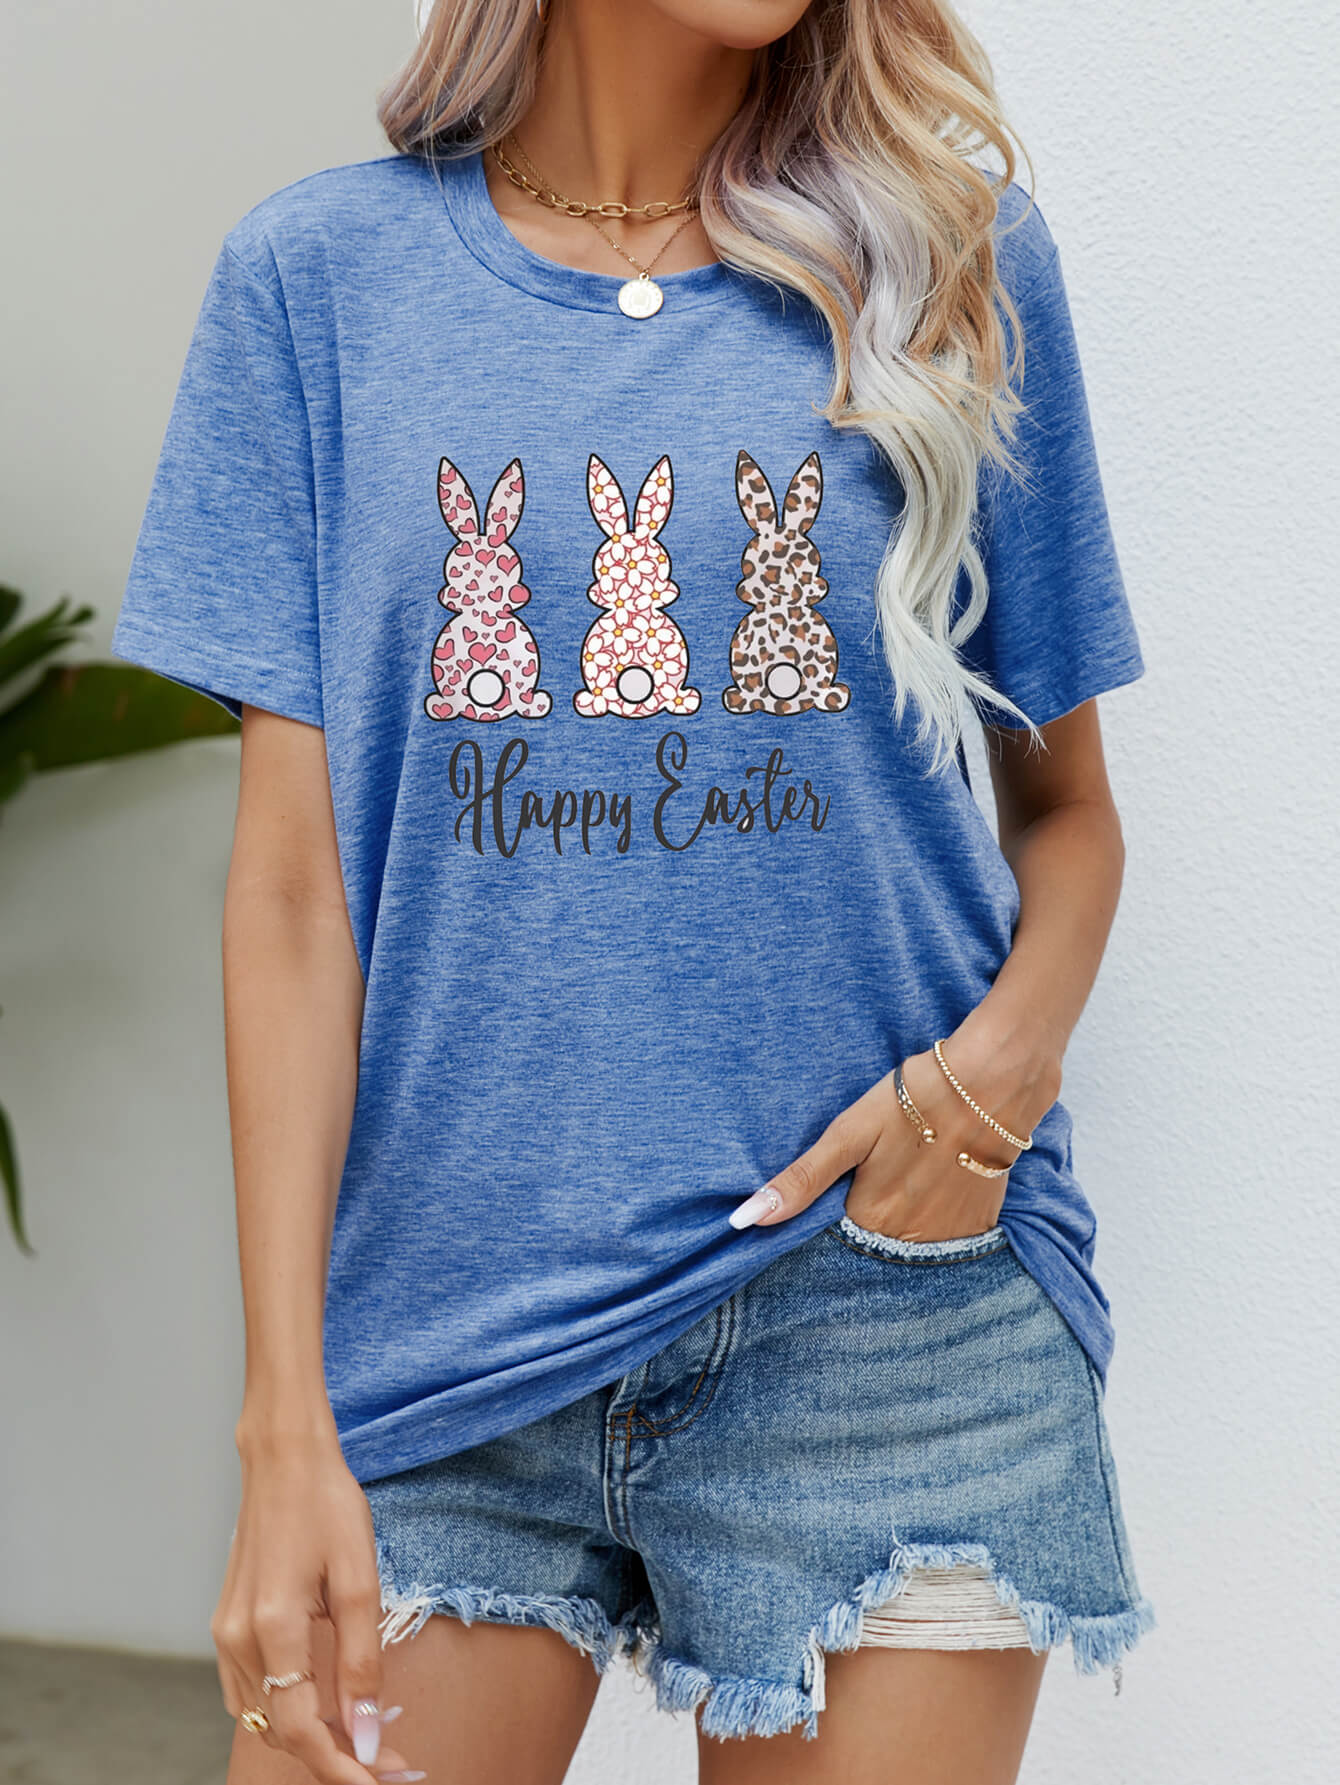 HAPPY EASTER Graphic Short Sleeve Tee - Blue / S - T-Shirts - Shirts & Tops - 4 - 2024